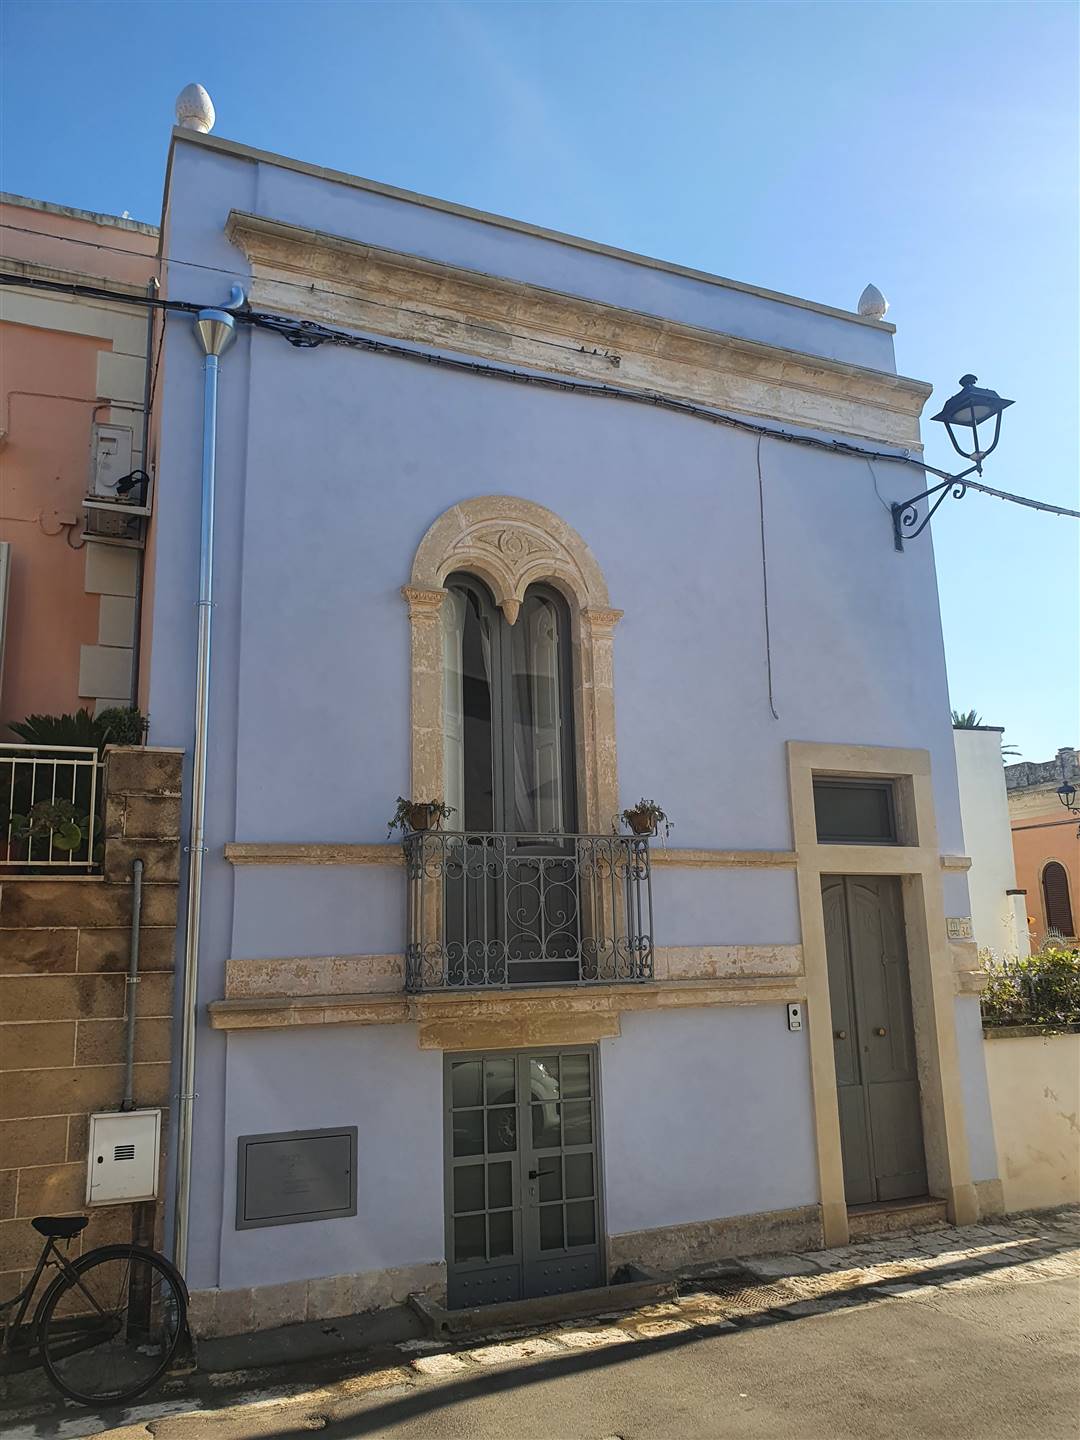 ORTELLE, Terraced house for sale of 125 Sq. mt., Restored, Heating Individual heating system, Energetic class: G, Epi: 217,035 kwh/m2 year, placed at 